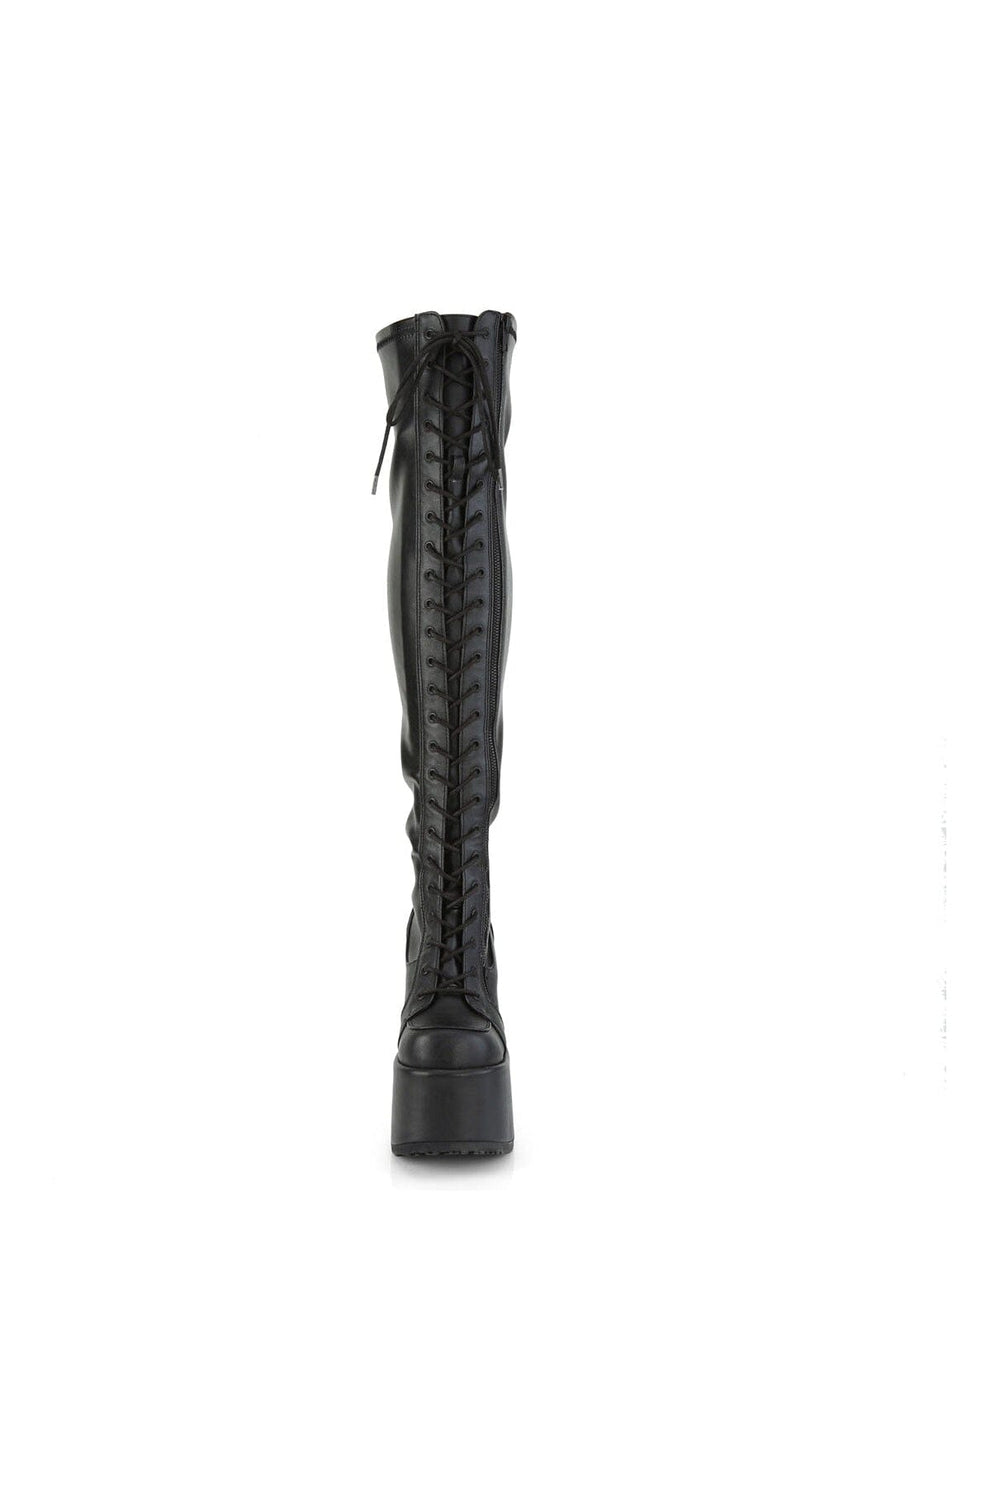 CAMEL-300 Black Vegan Leather Thigh Boot-Thigh Boots-Demonia-SEXYSHOES.COM